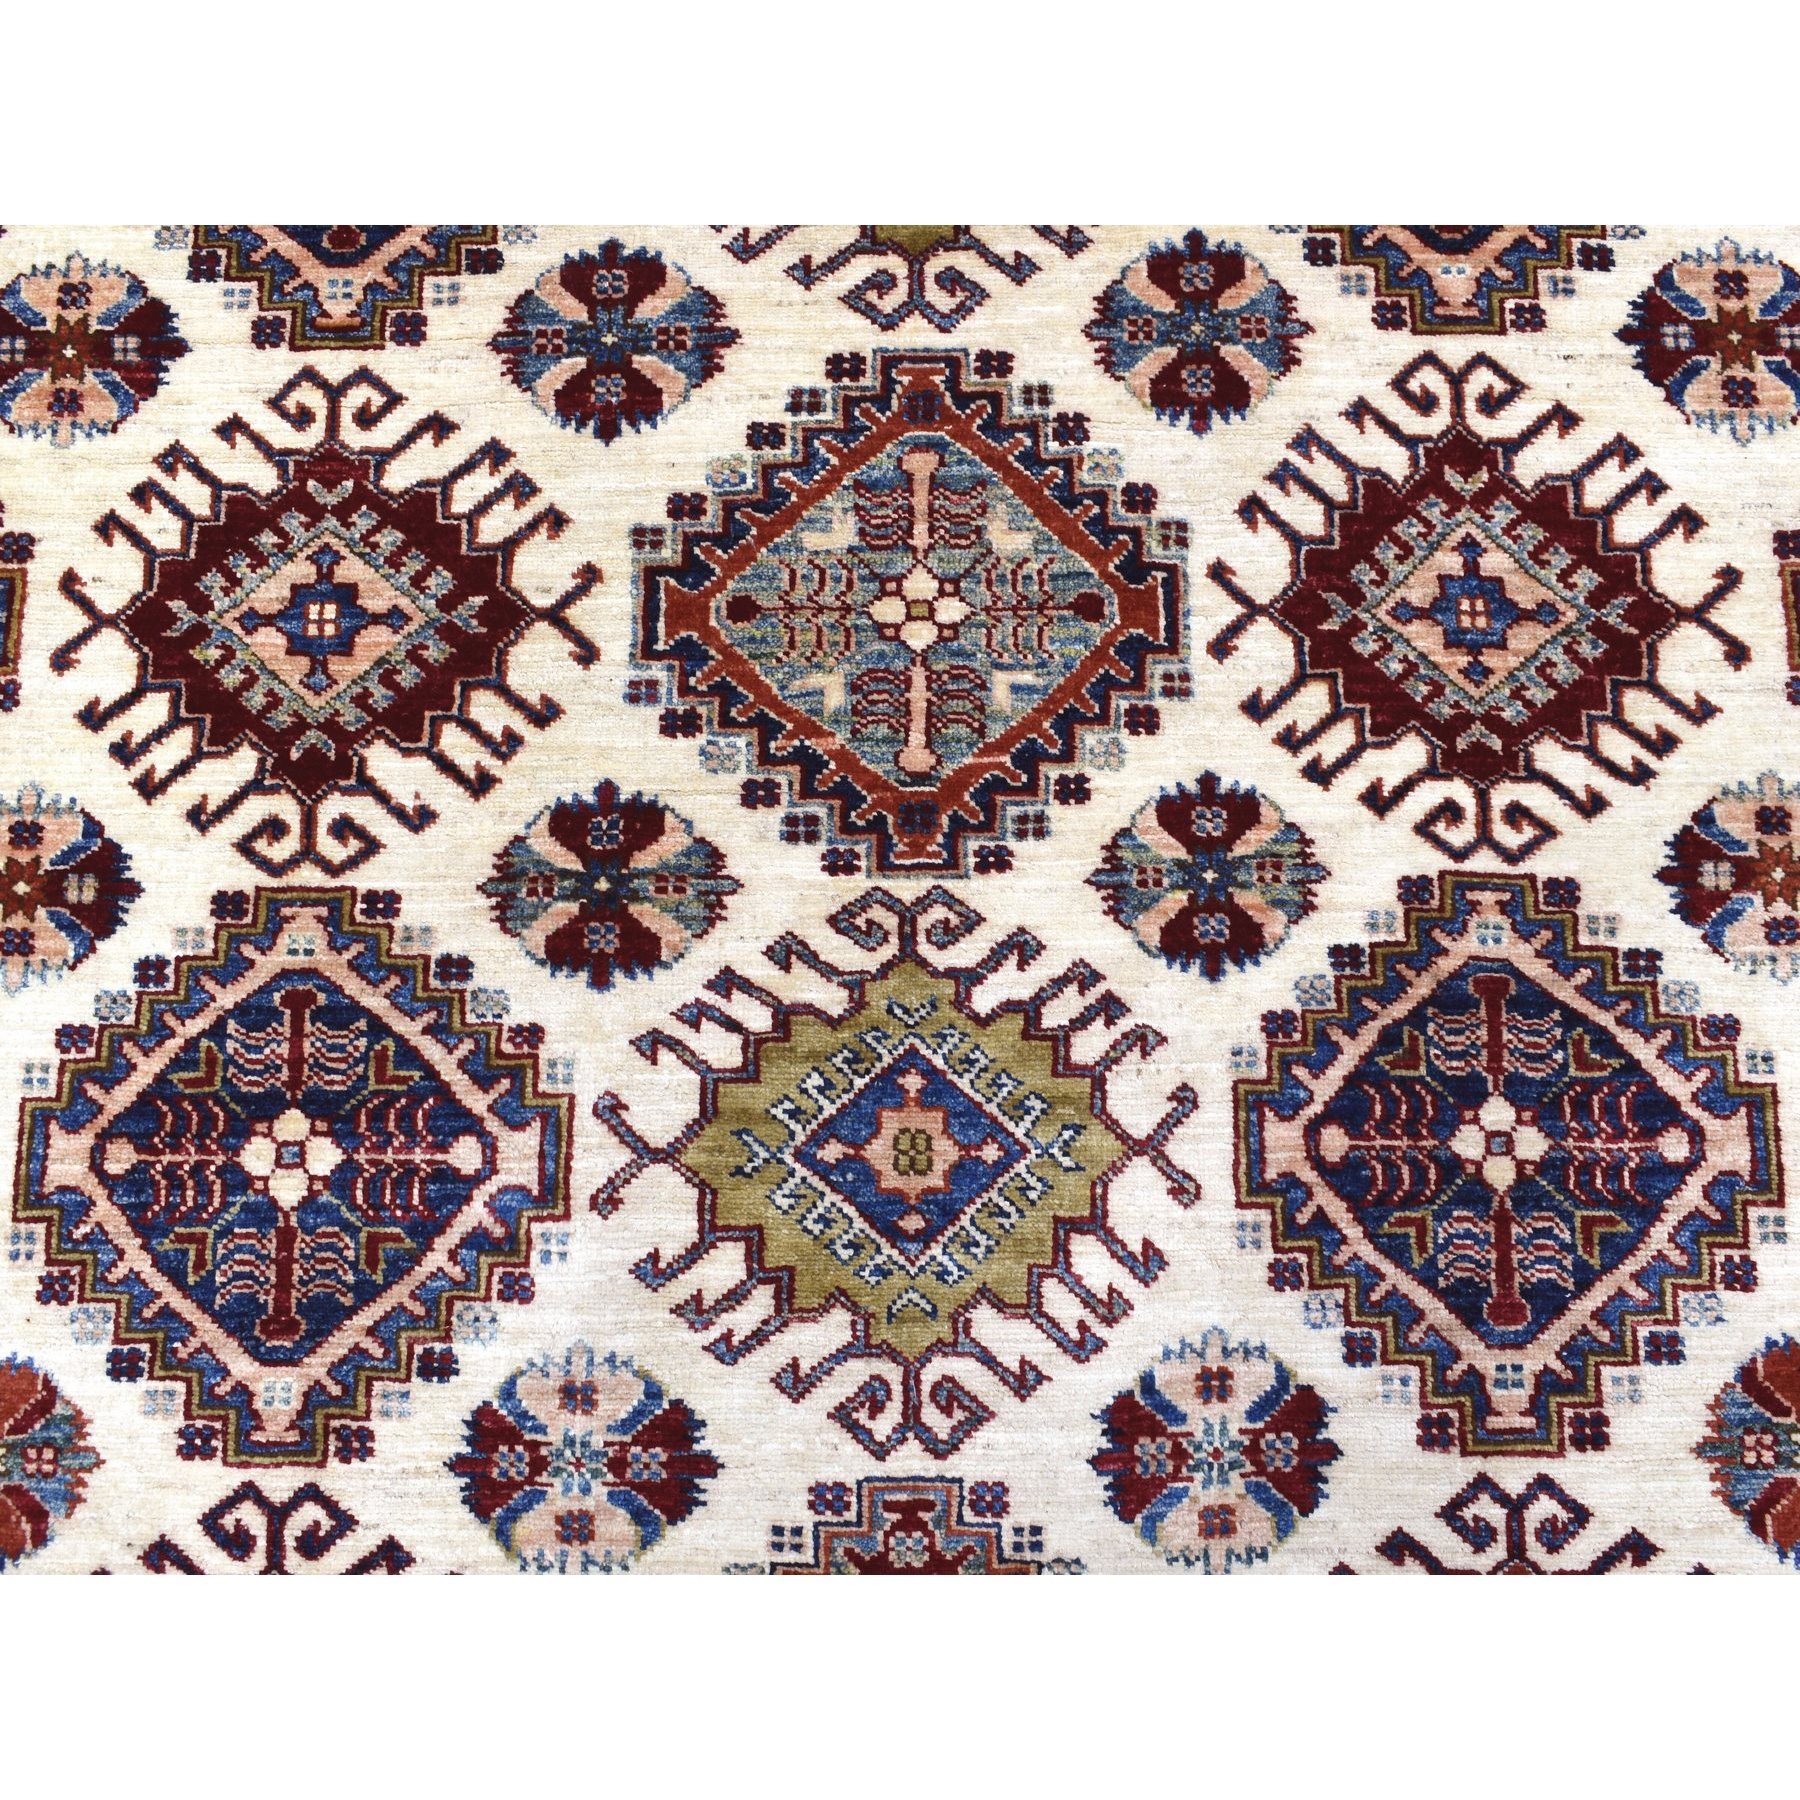 9'1"x12'4" Ivory with a Dark Red Border Super Kazak with Colorful Repetitive Medallions Afghan Shiny Wool Hand Woven Oriental Rug 